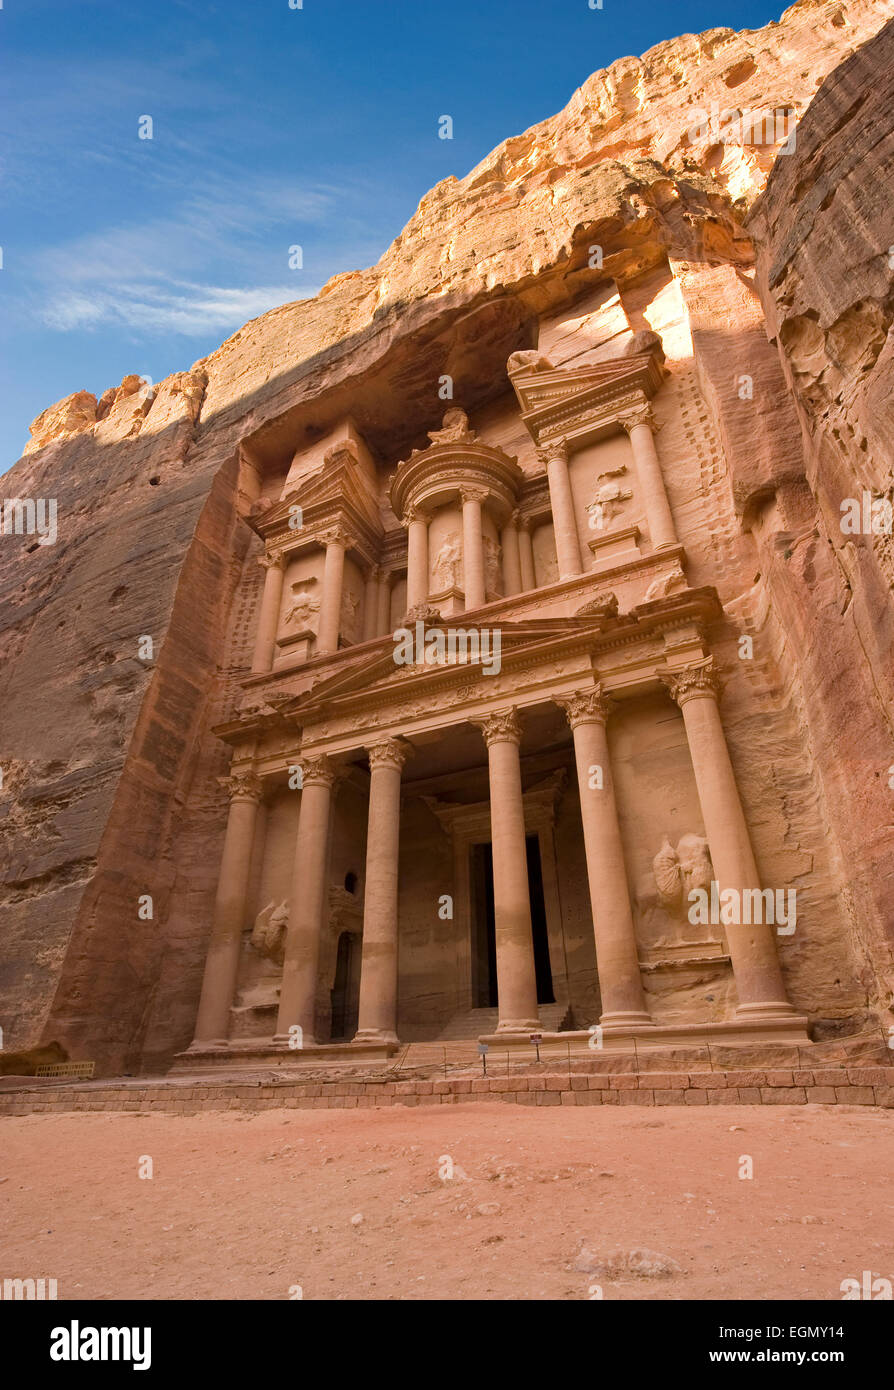 The treasury is also called Al Khazna, it is the most magnificant and famous facade in Petra Jordan Stock Photo